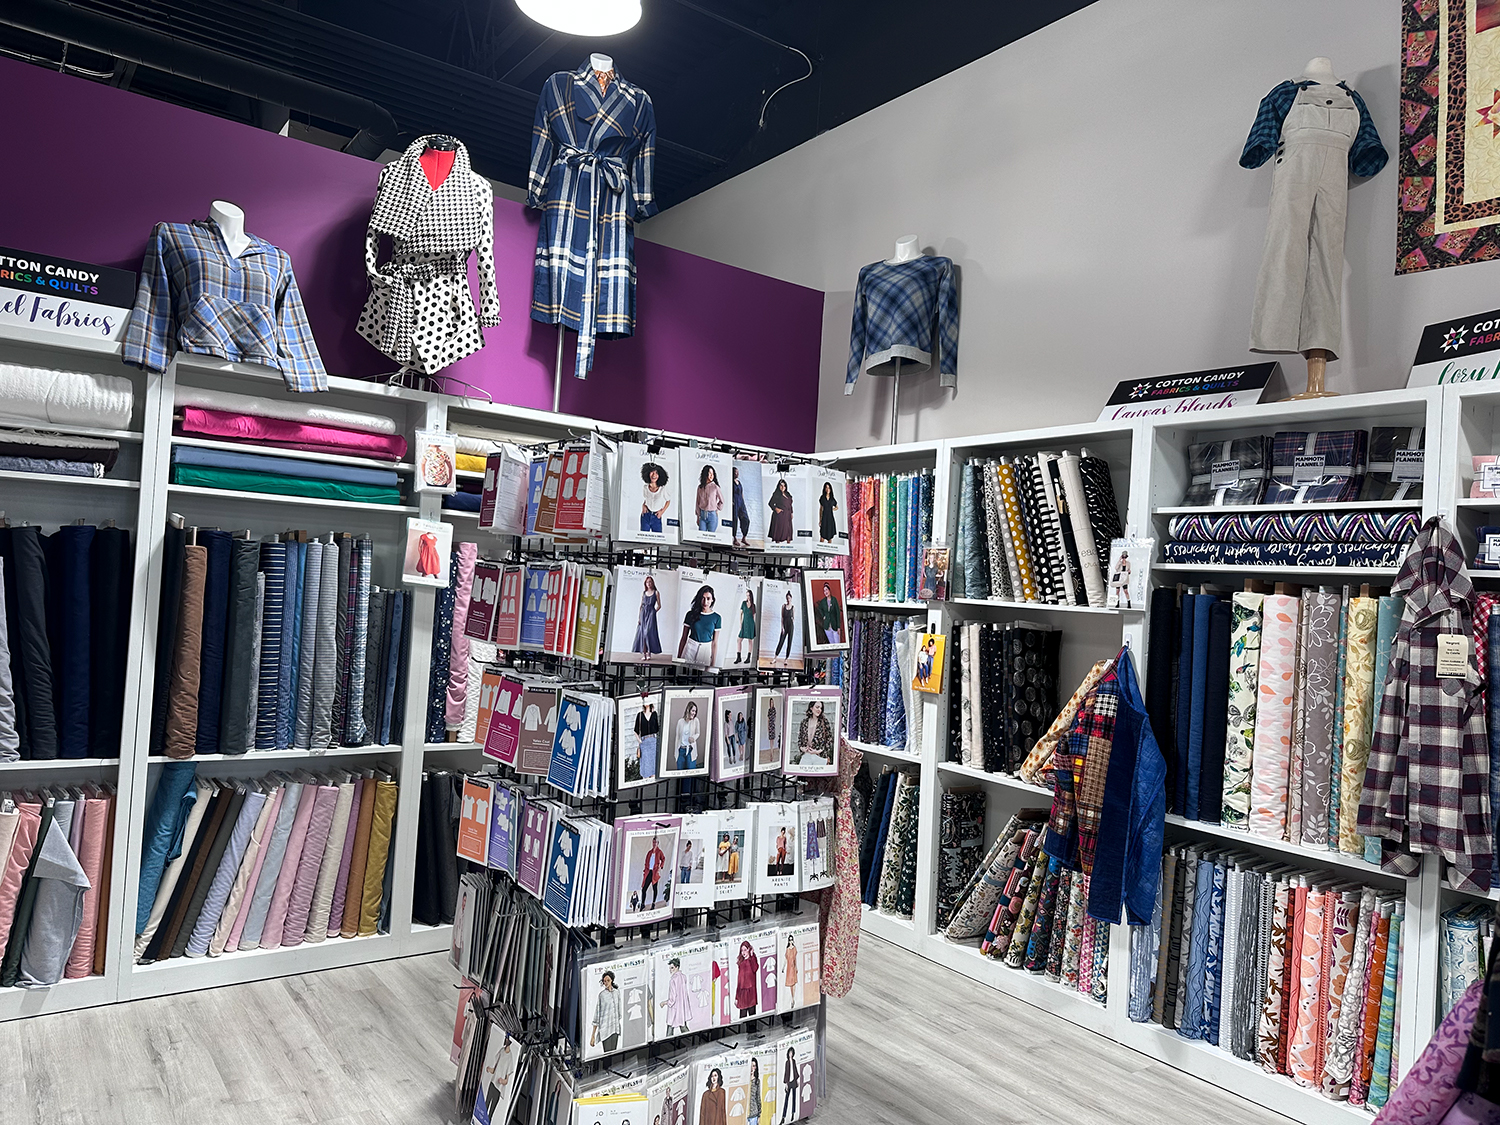 interior of a fabric store with apparel patterns and fabric